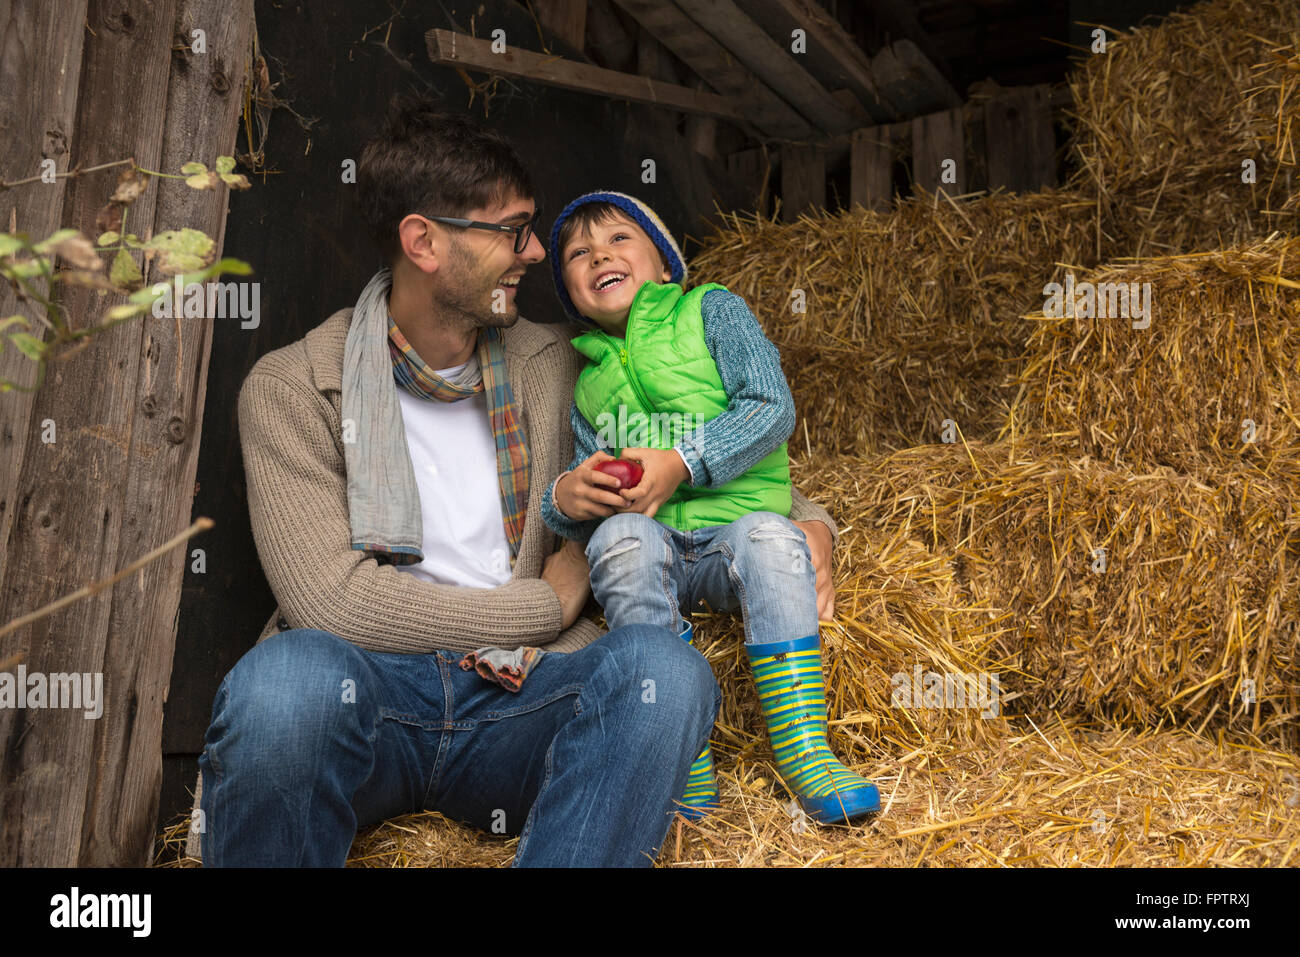 Father and son sitting on straw in the stable and laughing, Bavaria, Germany Stock Photo